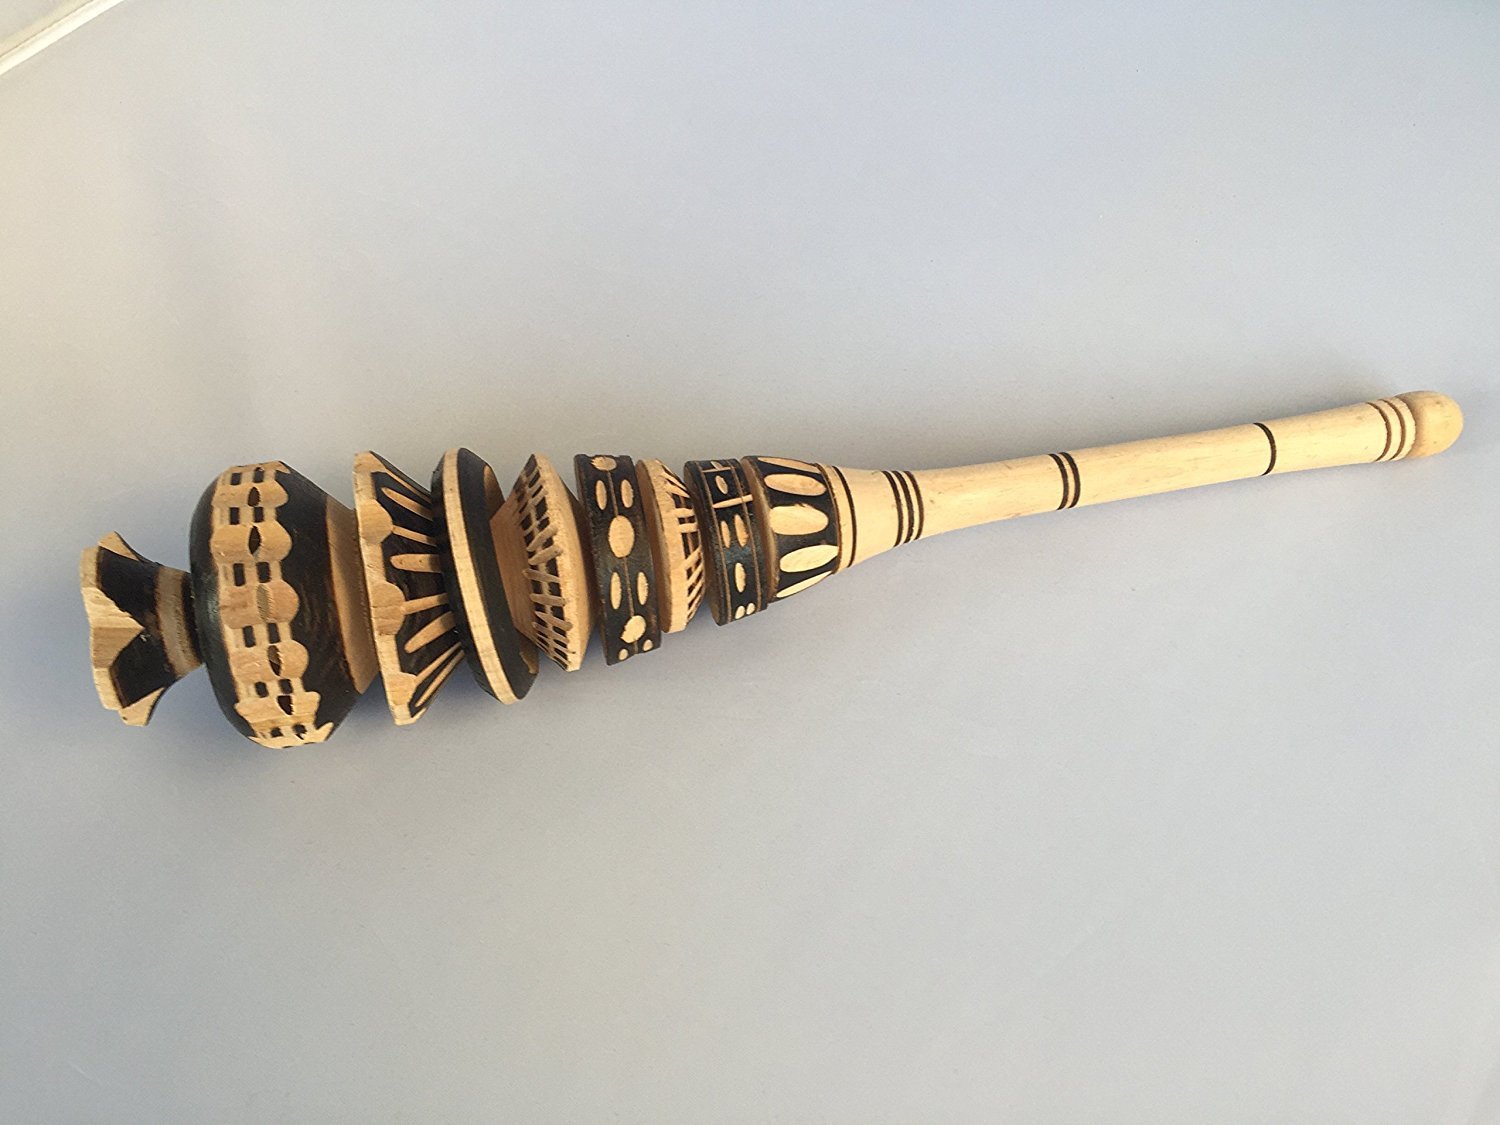 Genuine Traditional Mexican Wooden Handcrafted Molinillo Stirrer